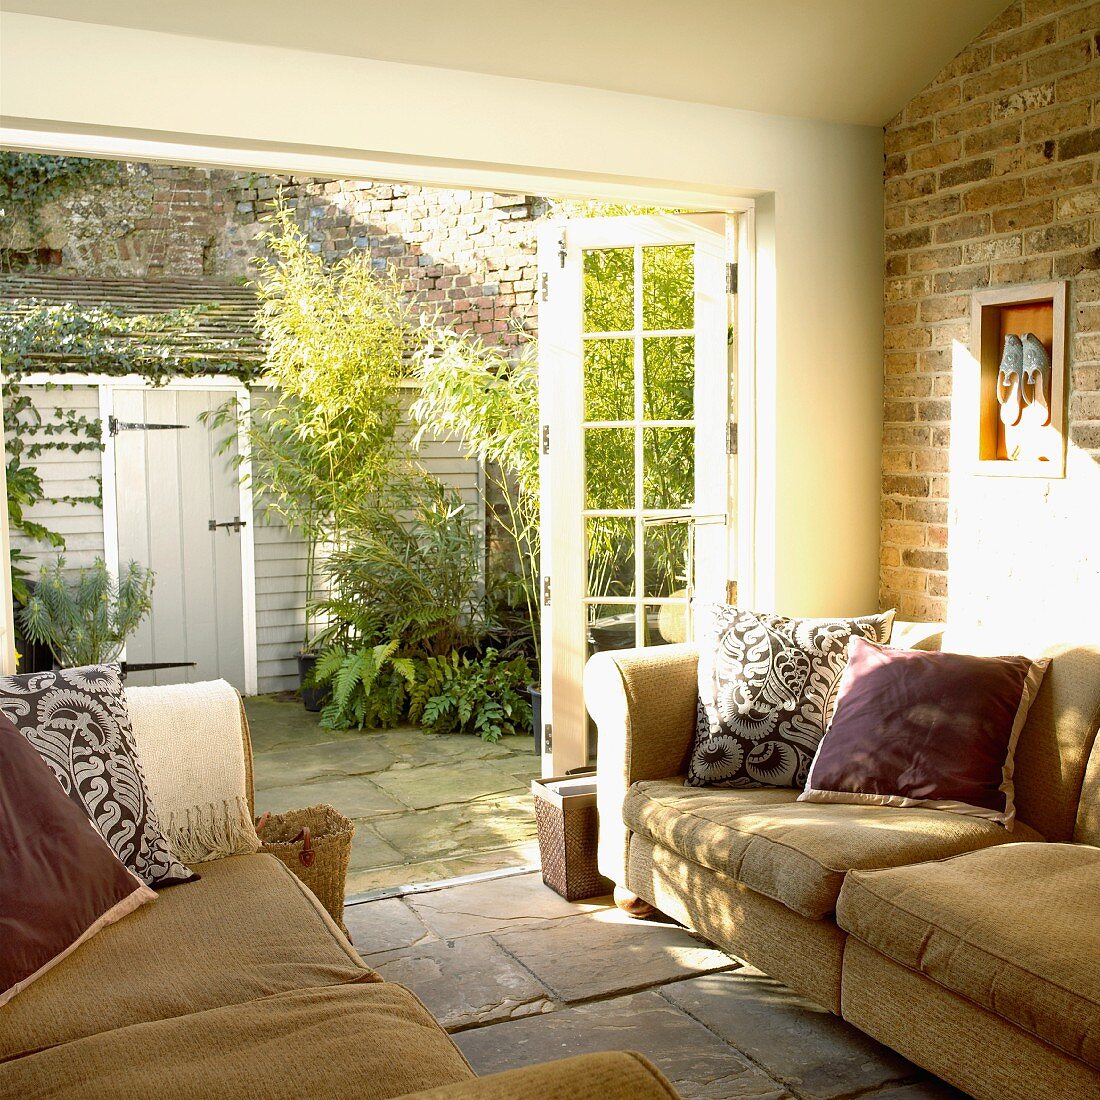 Living room with sectional sofas and open doors into a courtyard filled with green plants